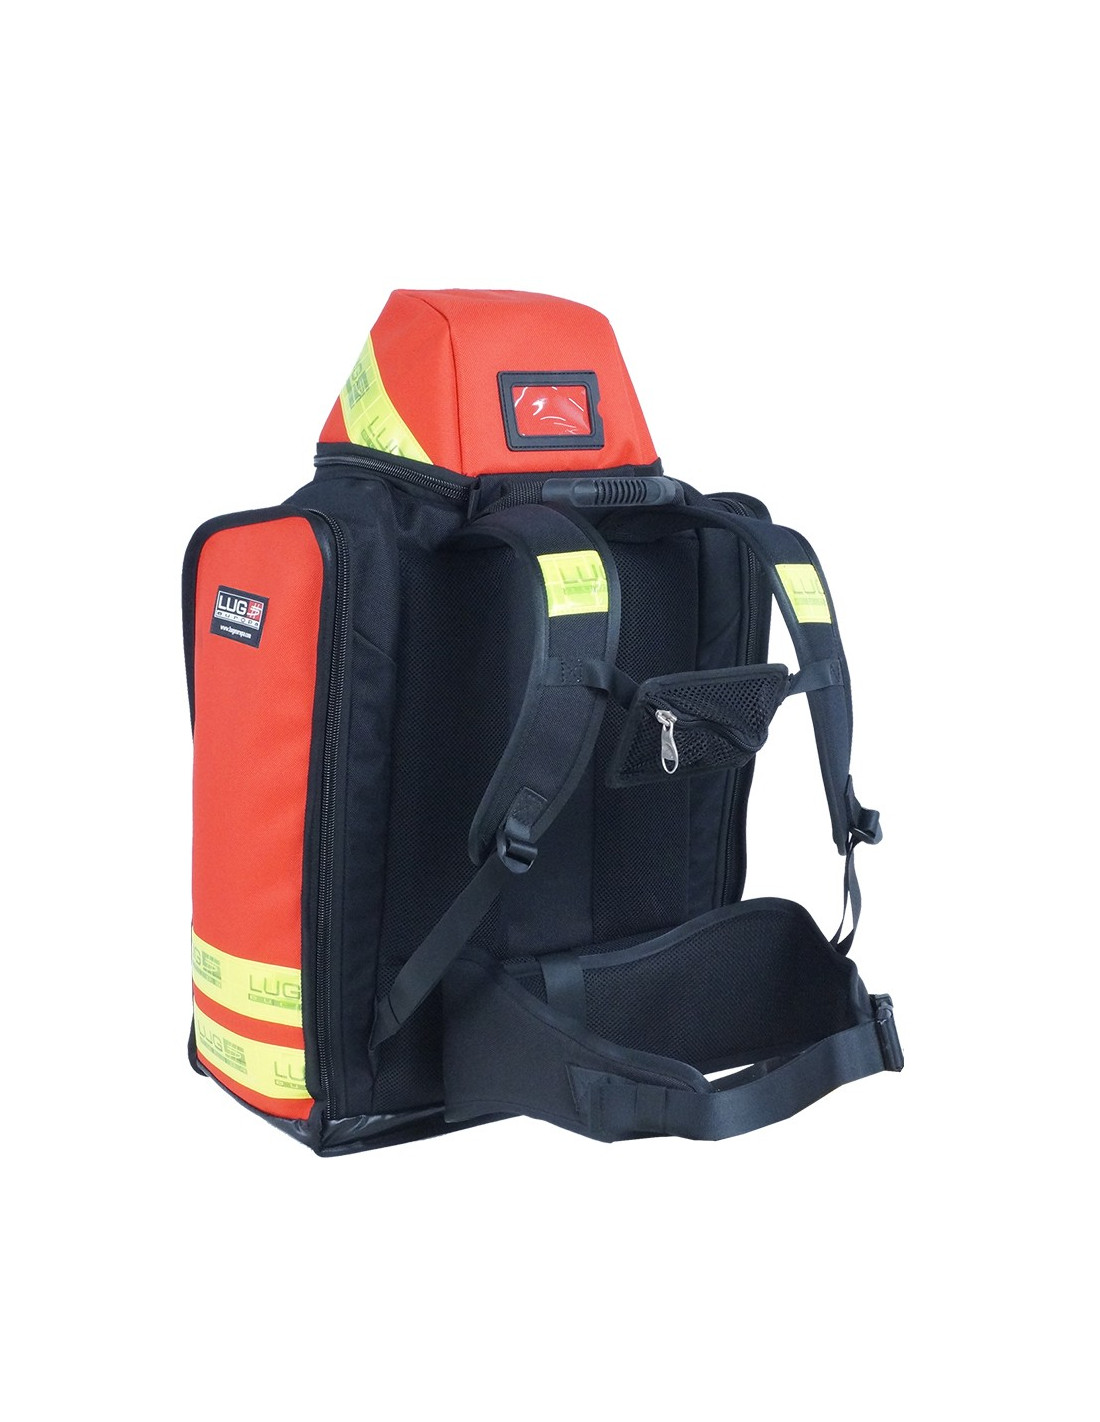 sac-secours-medical-o2-gamme-medicale (2)